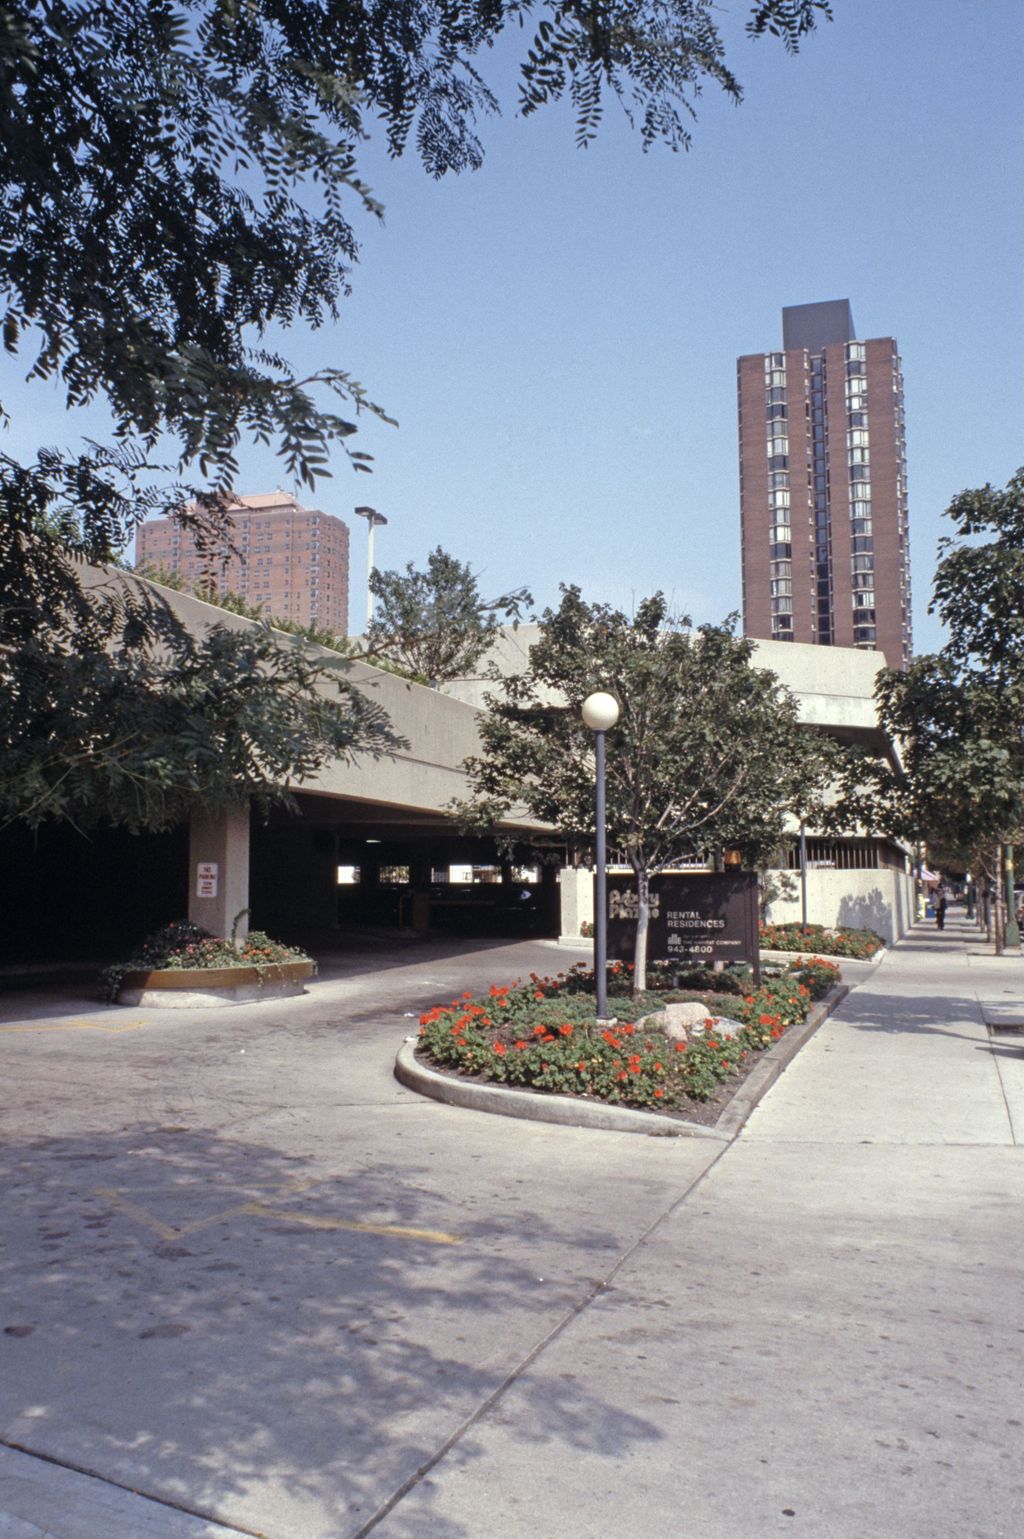 Miniature of Asbury Plaza, parking structure